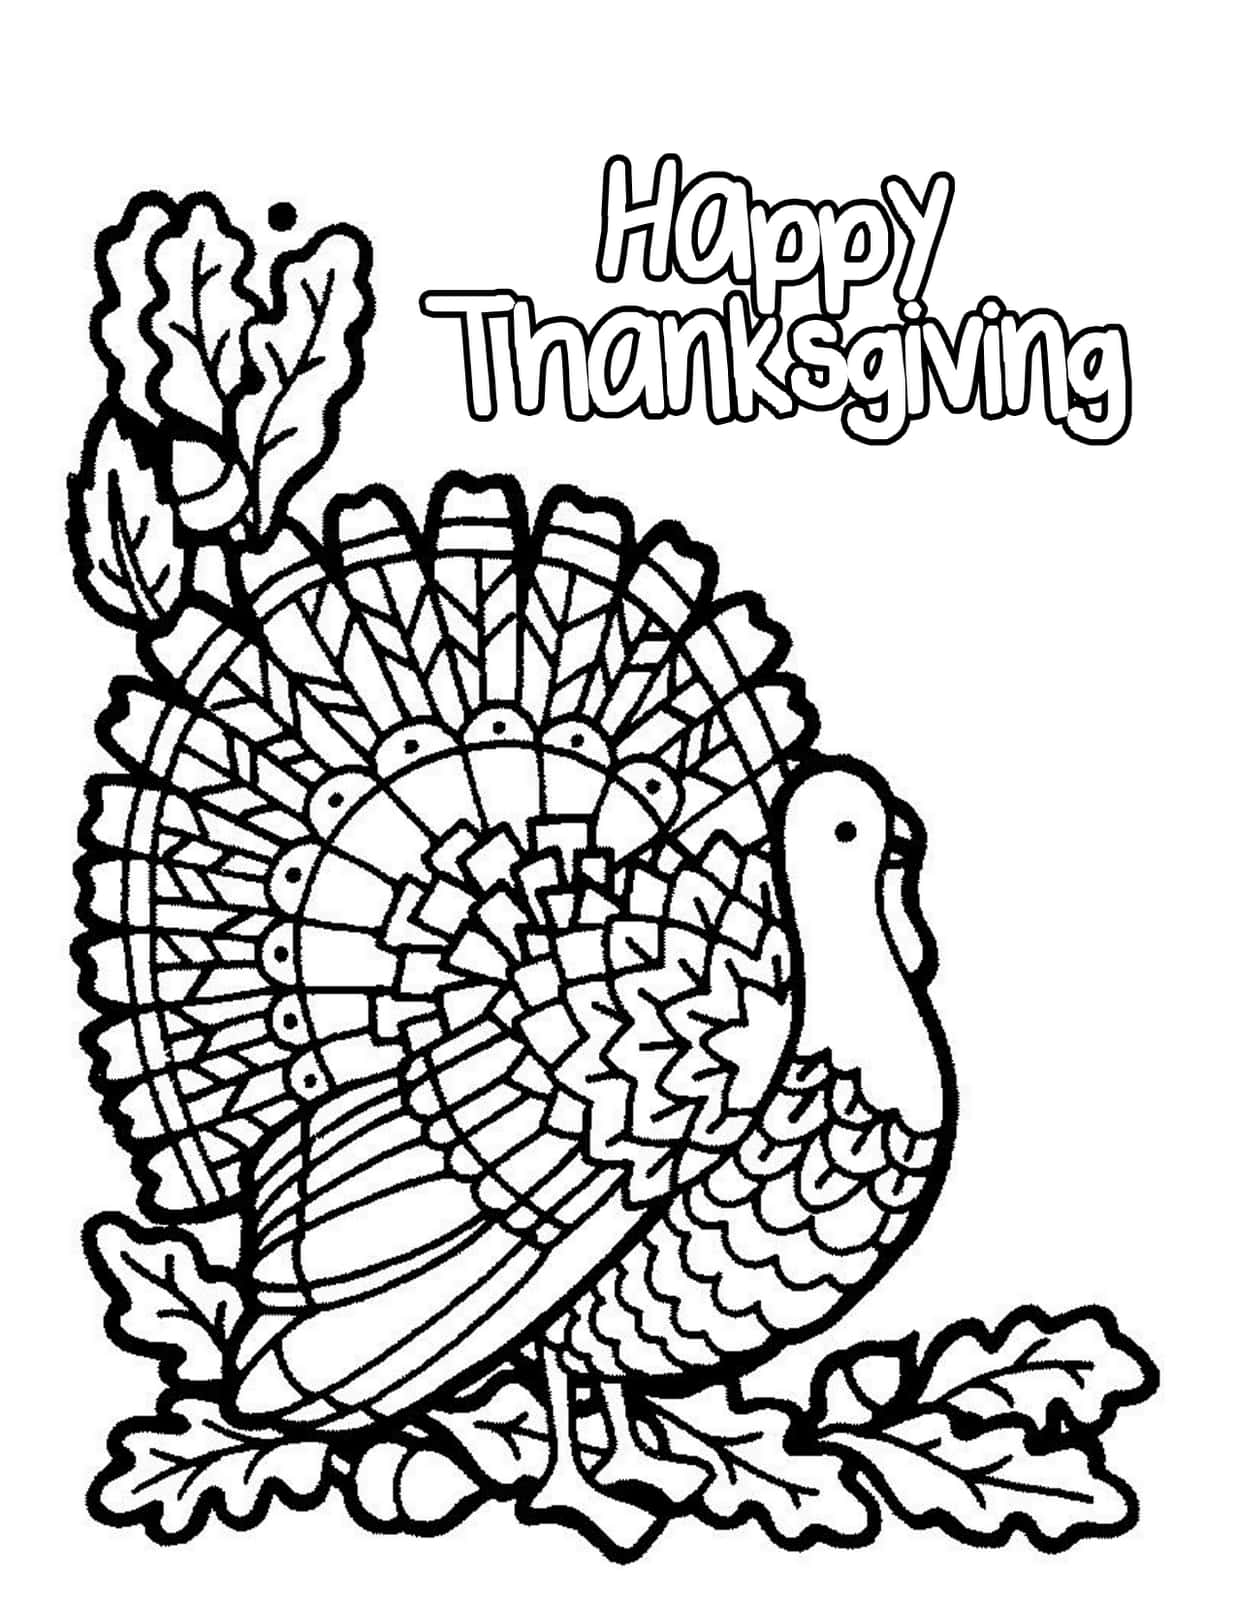 It's time for some fun! Enjoy Thanksgiving with this delightful coloring page.